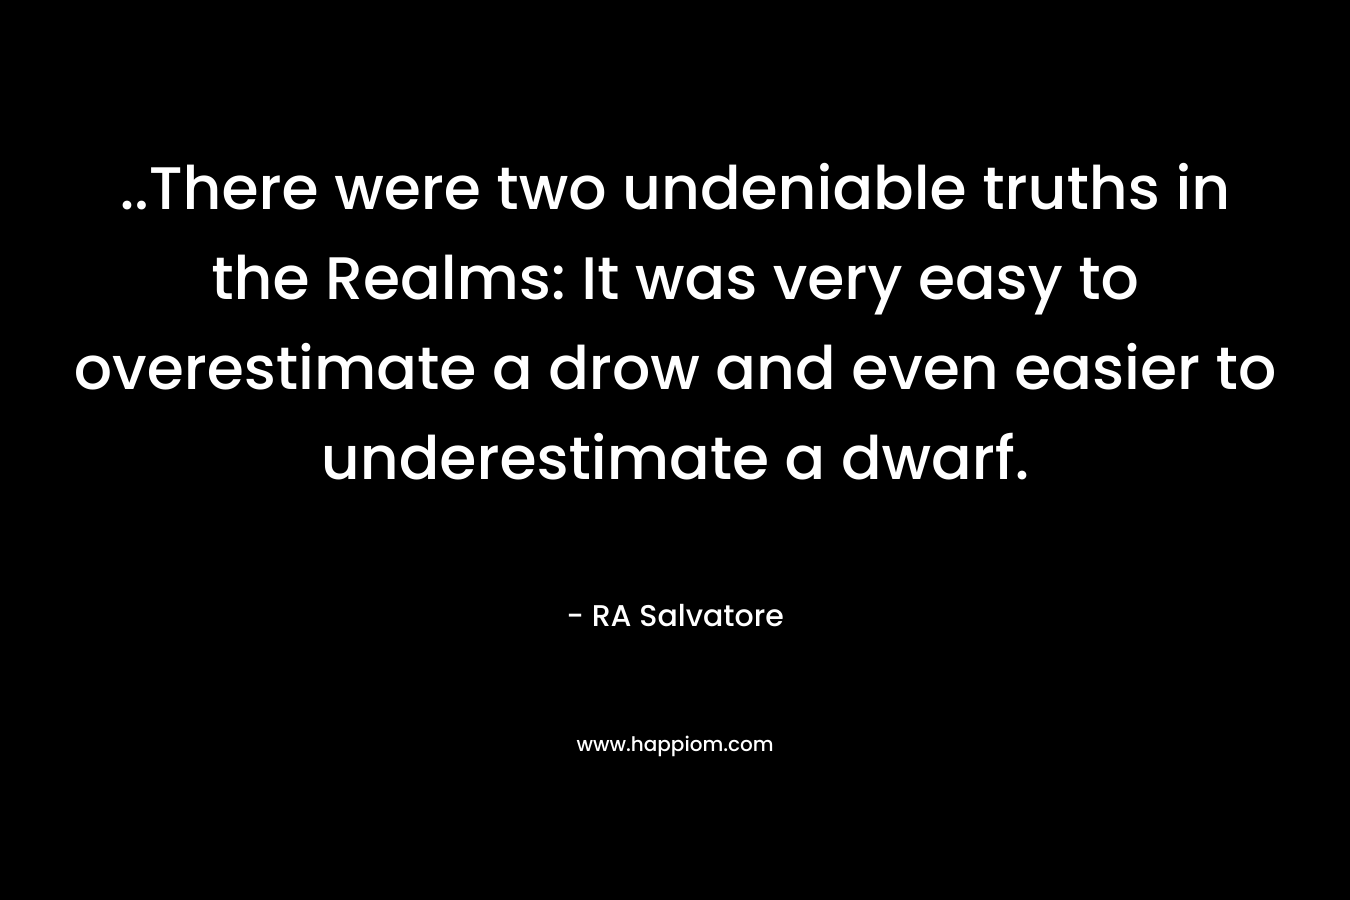 ..There were two undeniable truths in the Realms: It was very easy to overestimate a drow and even easier to underestimate a dwarf. – RA Salvatore